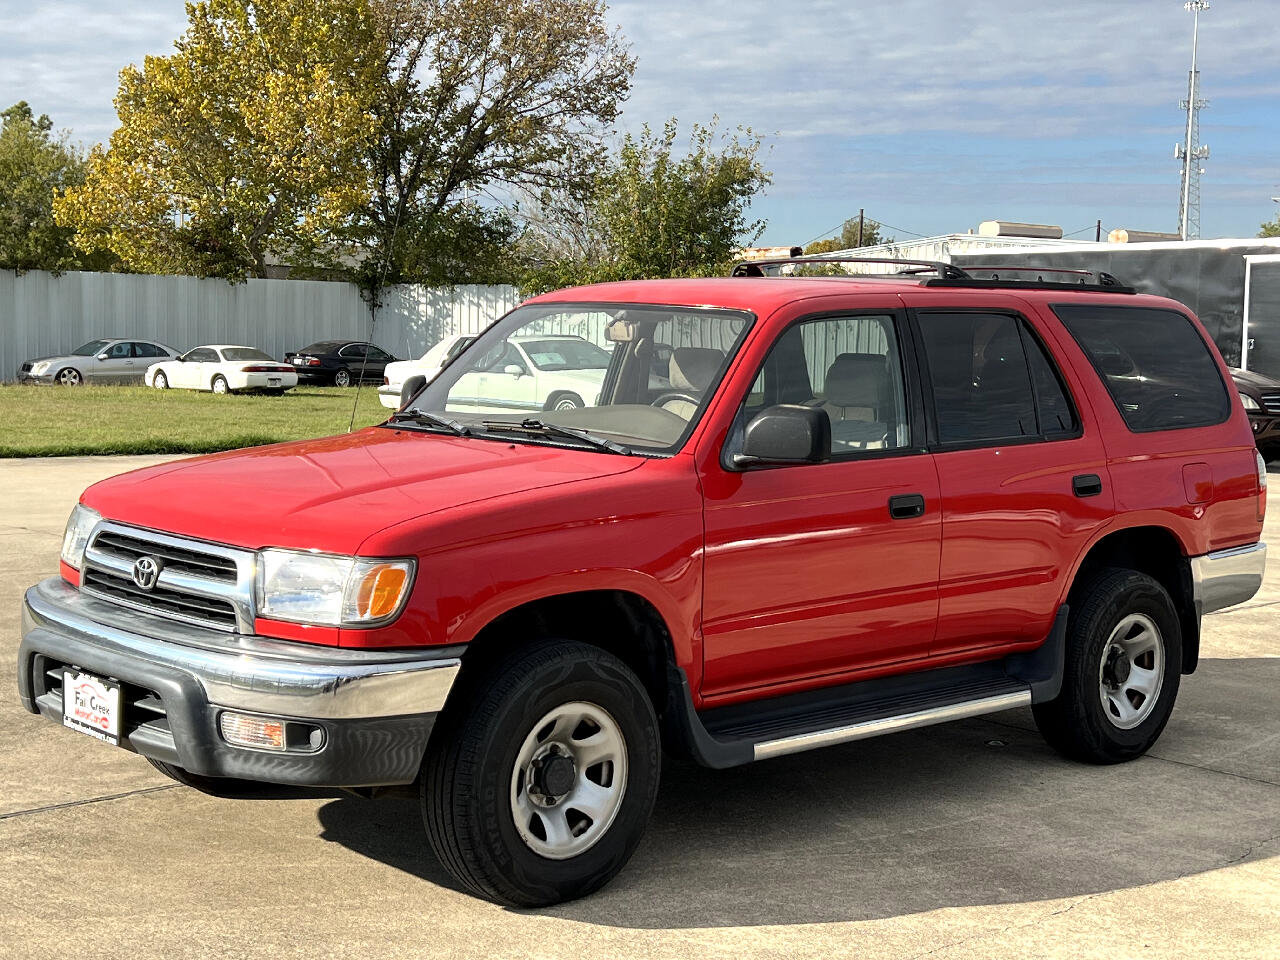 Used 2000 Toyota 4Runner for Sale Right Now - Autotrader